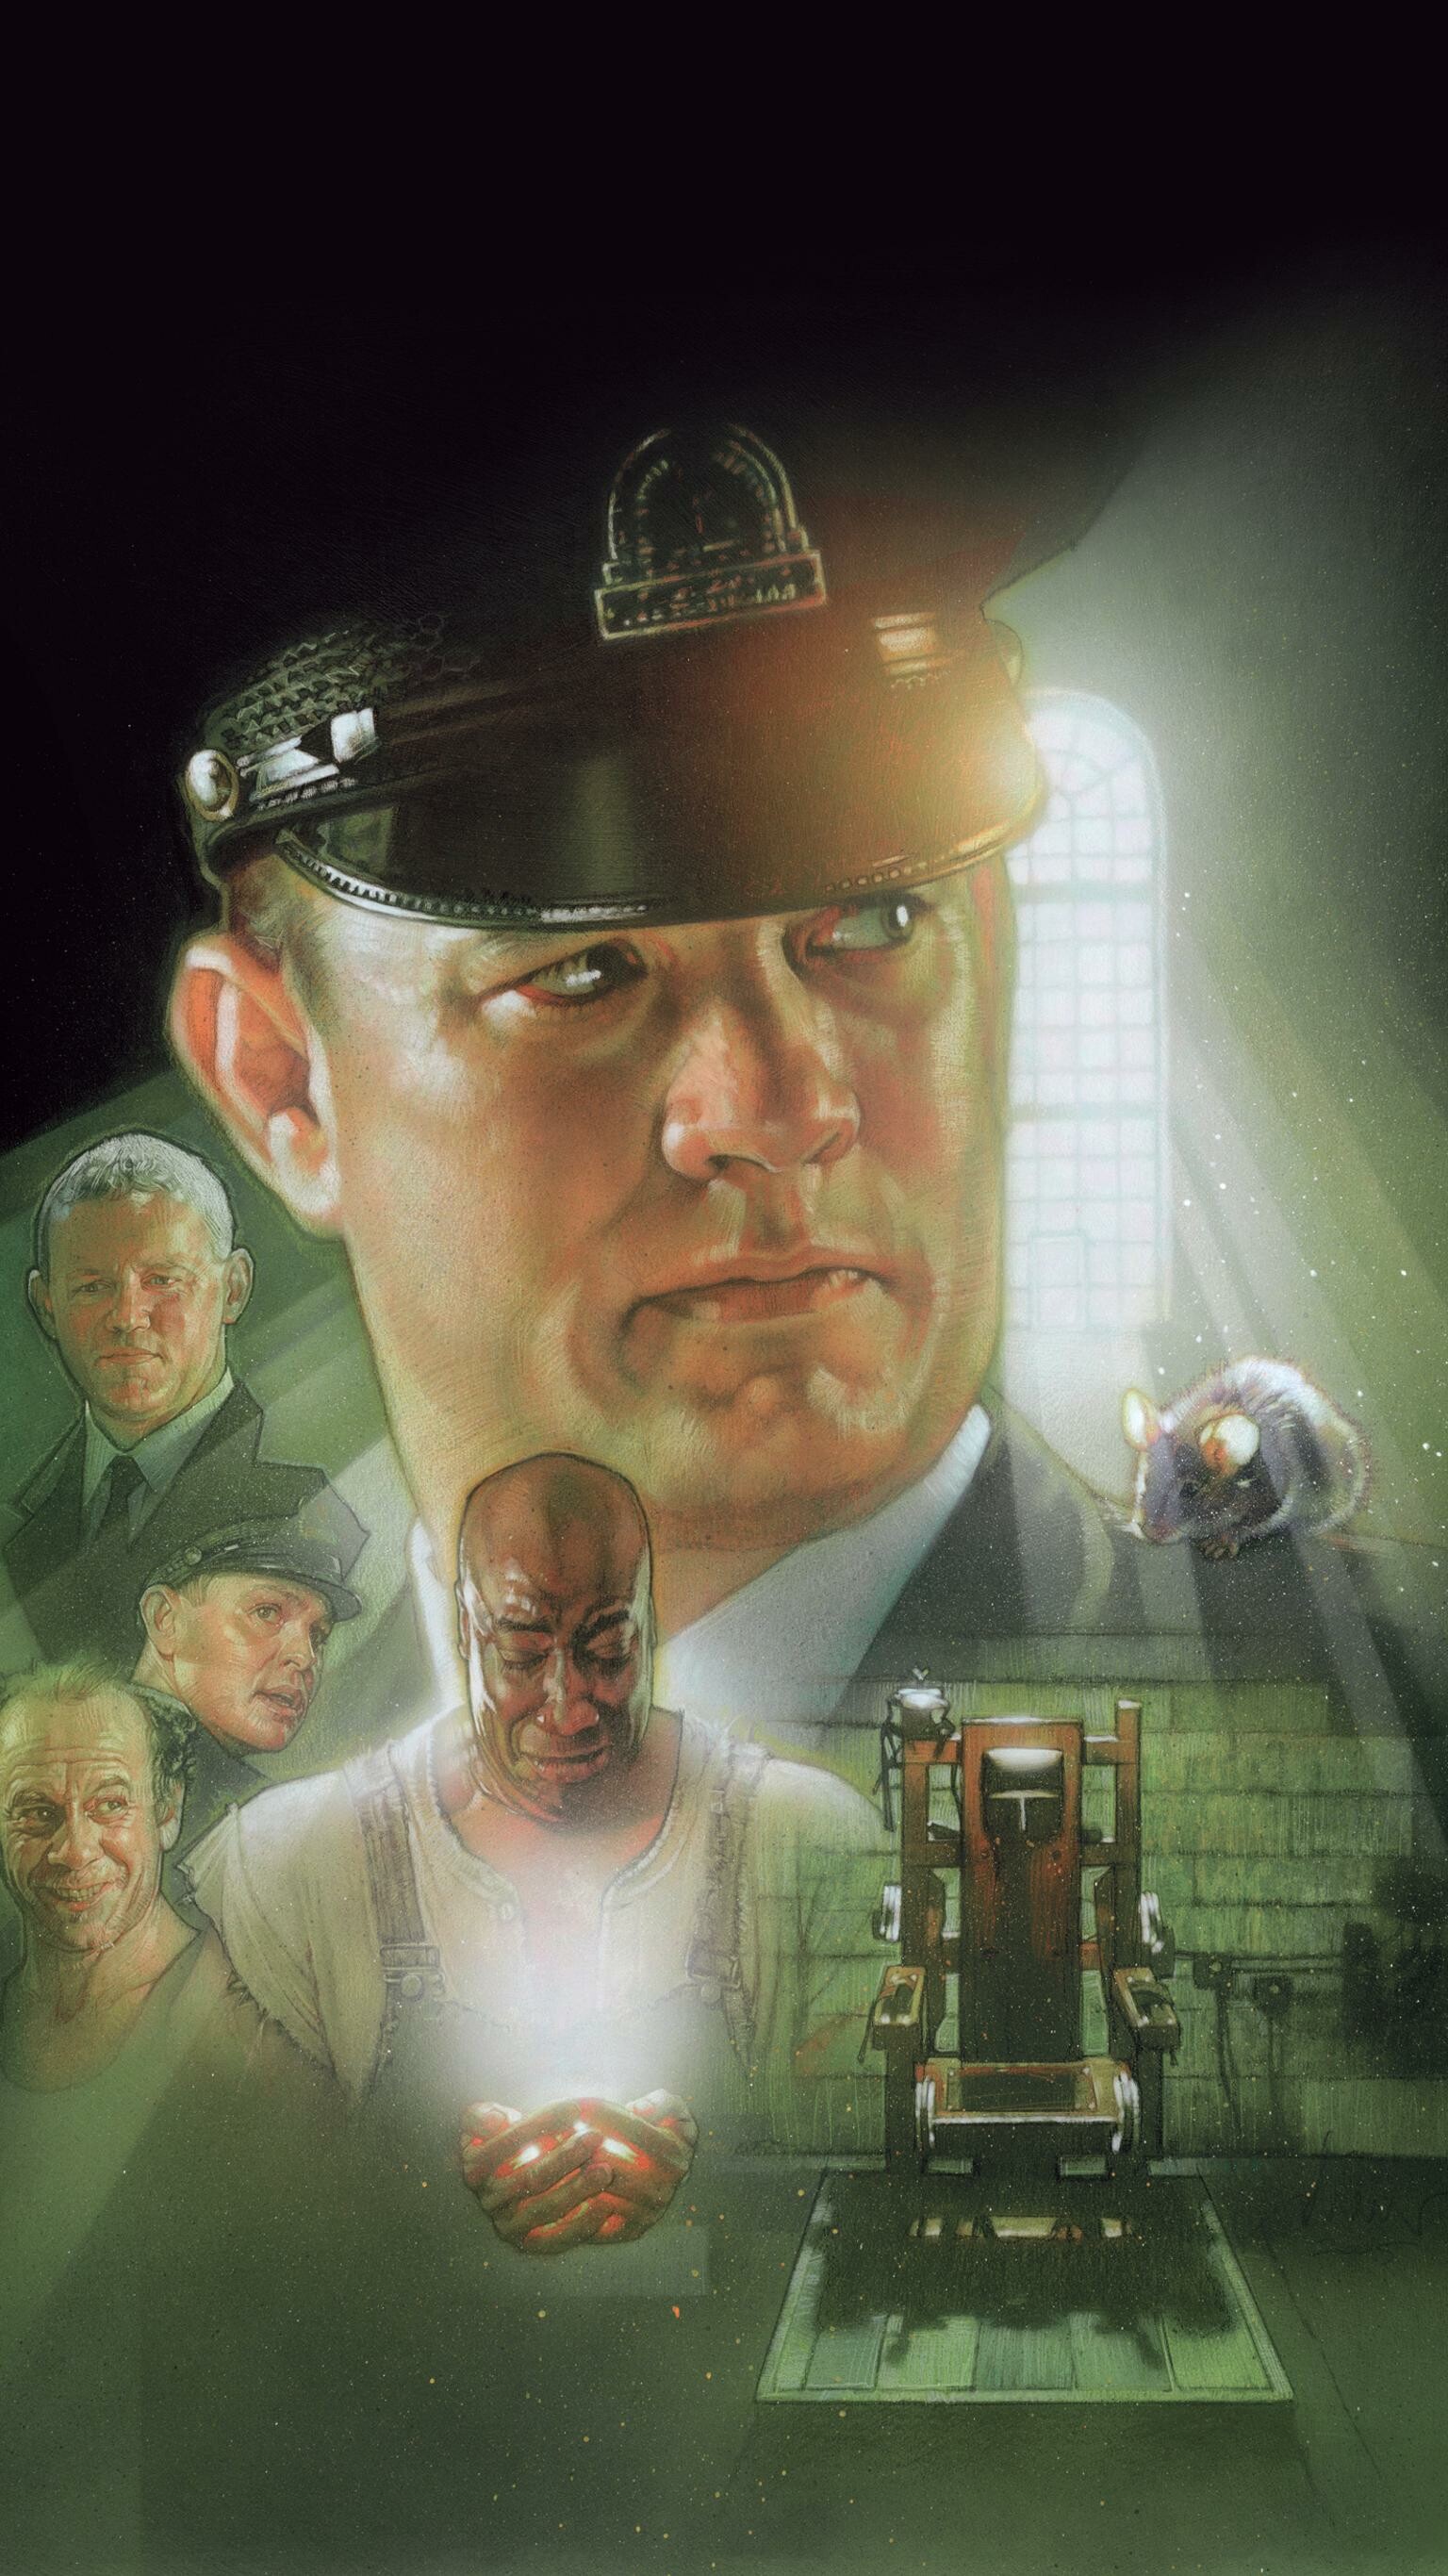 The Green Mile: The film stars Tom Hanks as a death row prison guard during the Great Depression. 1540x2740 HD Background.